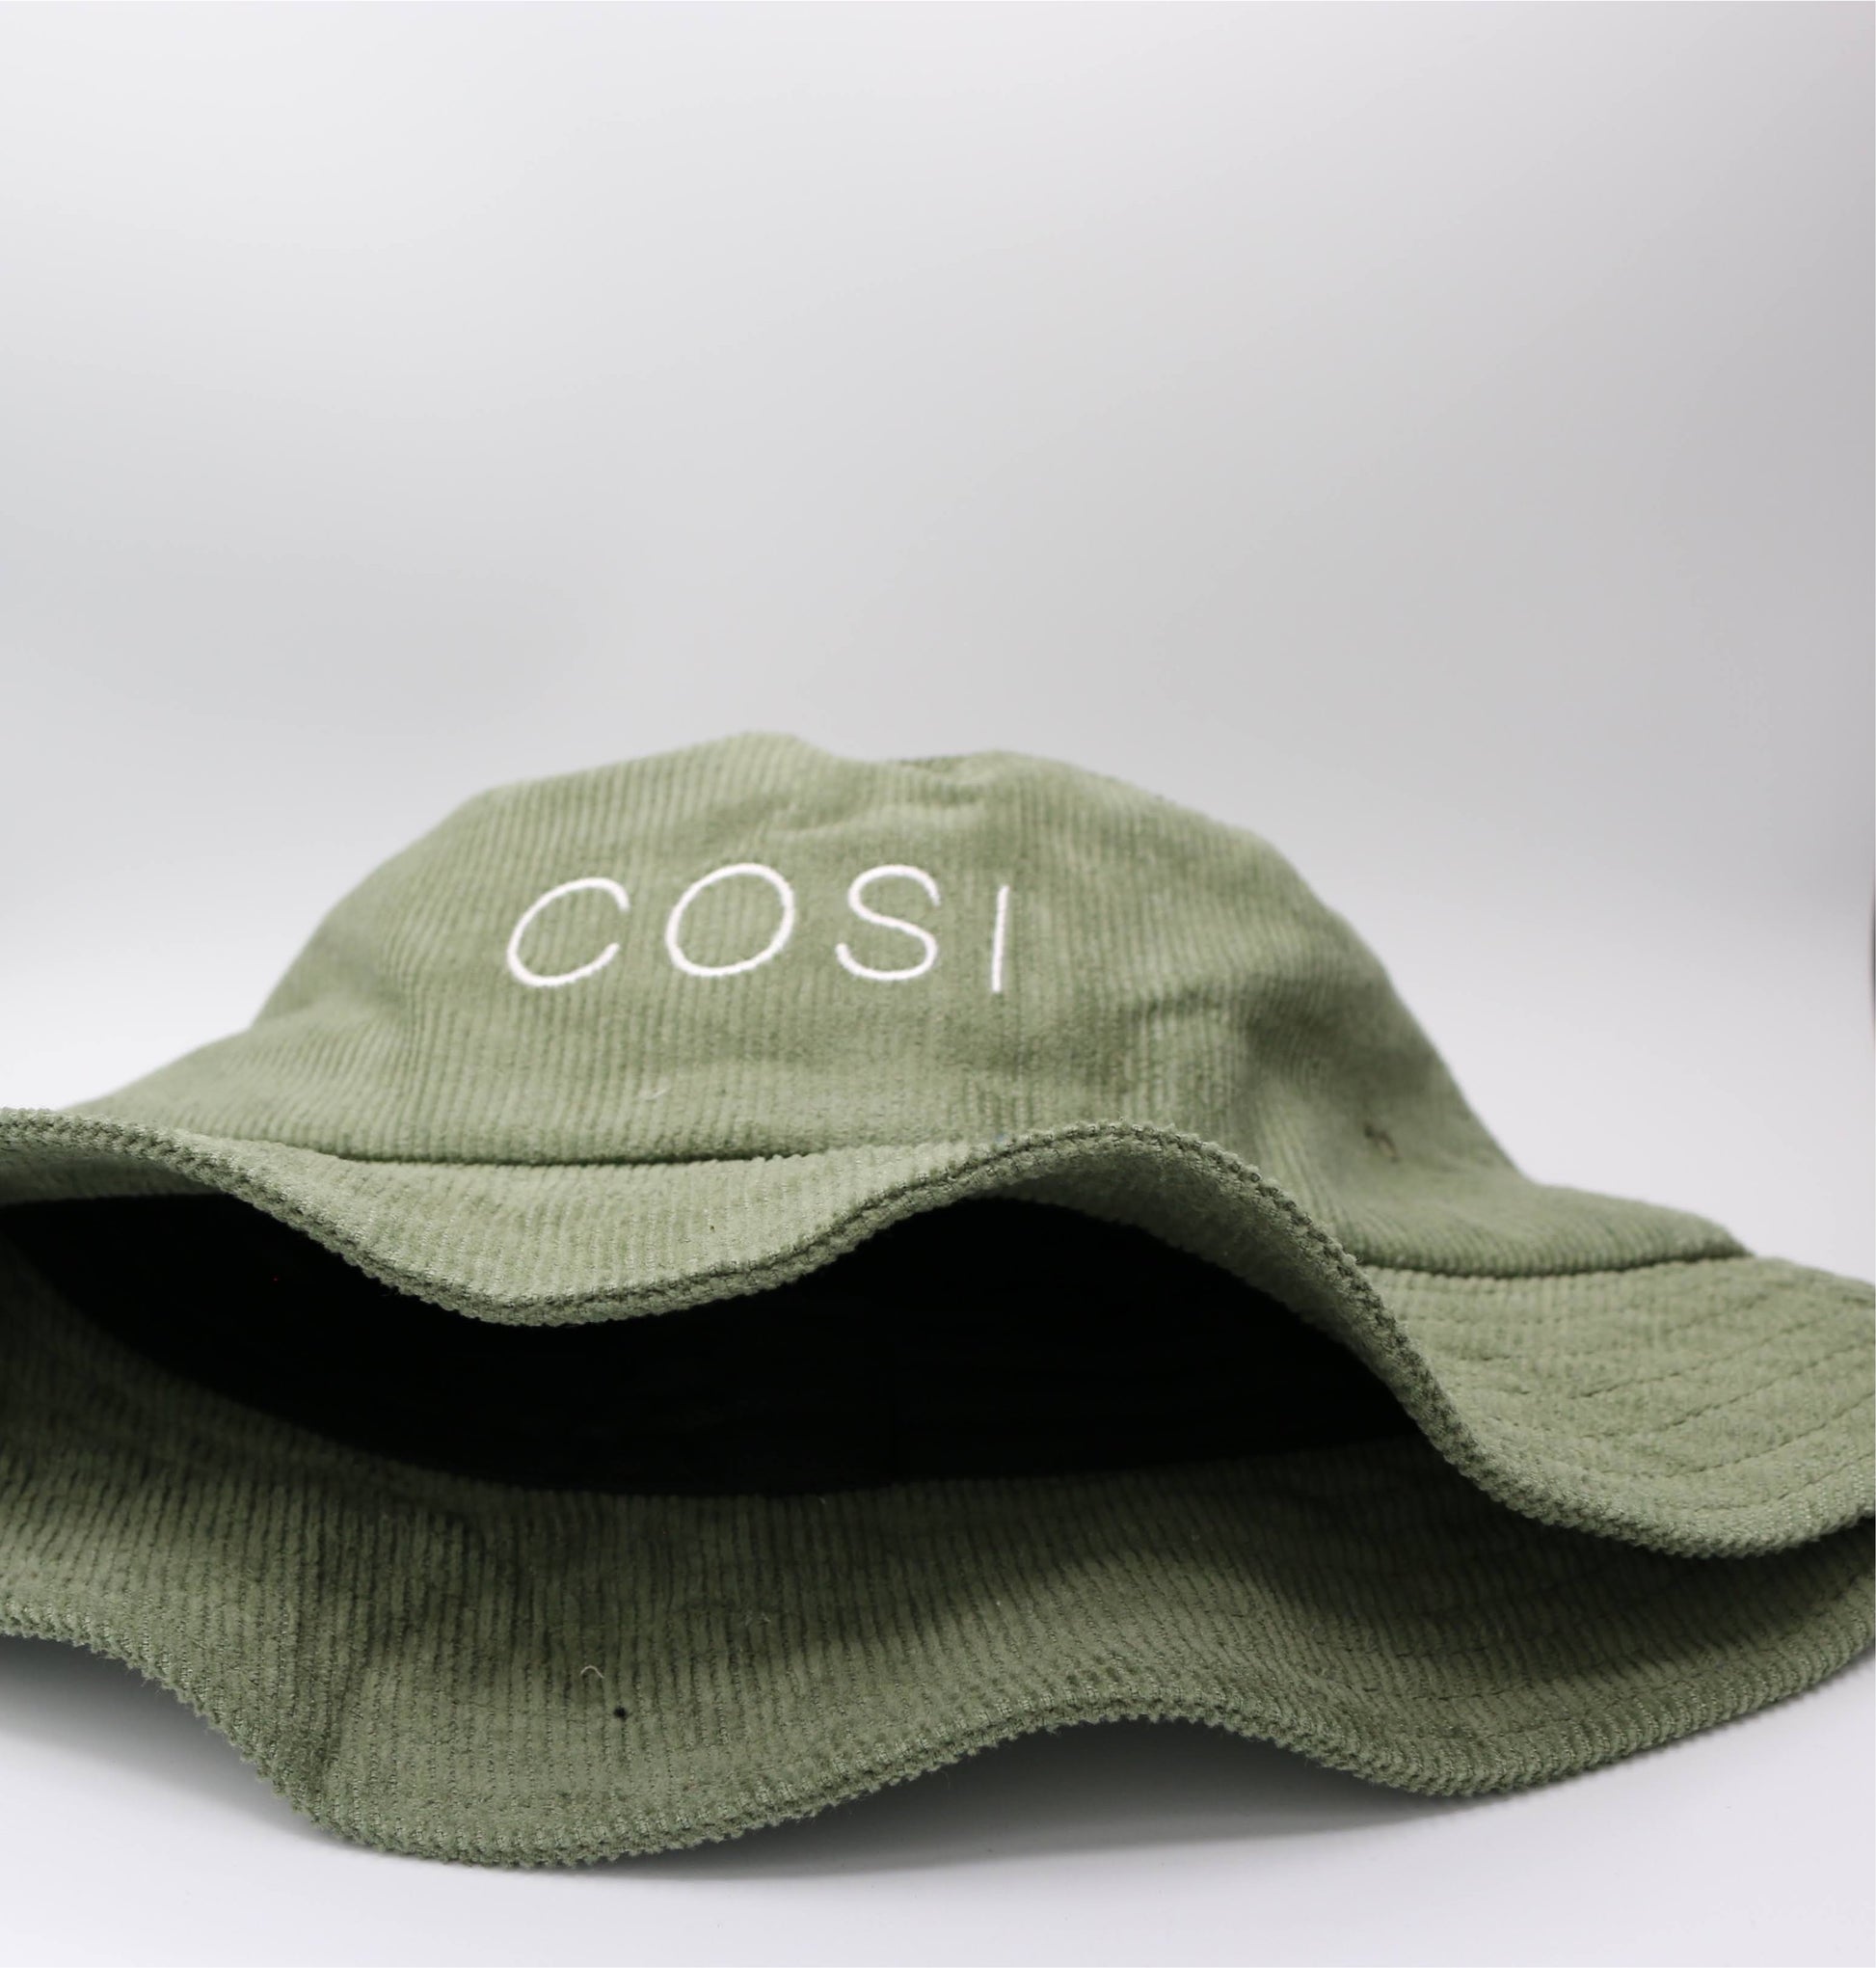 THE OLIVE GREEN BUCKET HAT - COSI & co.